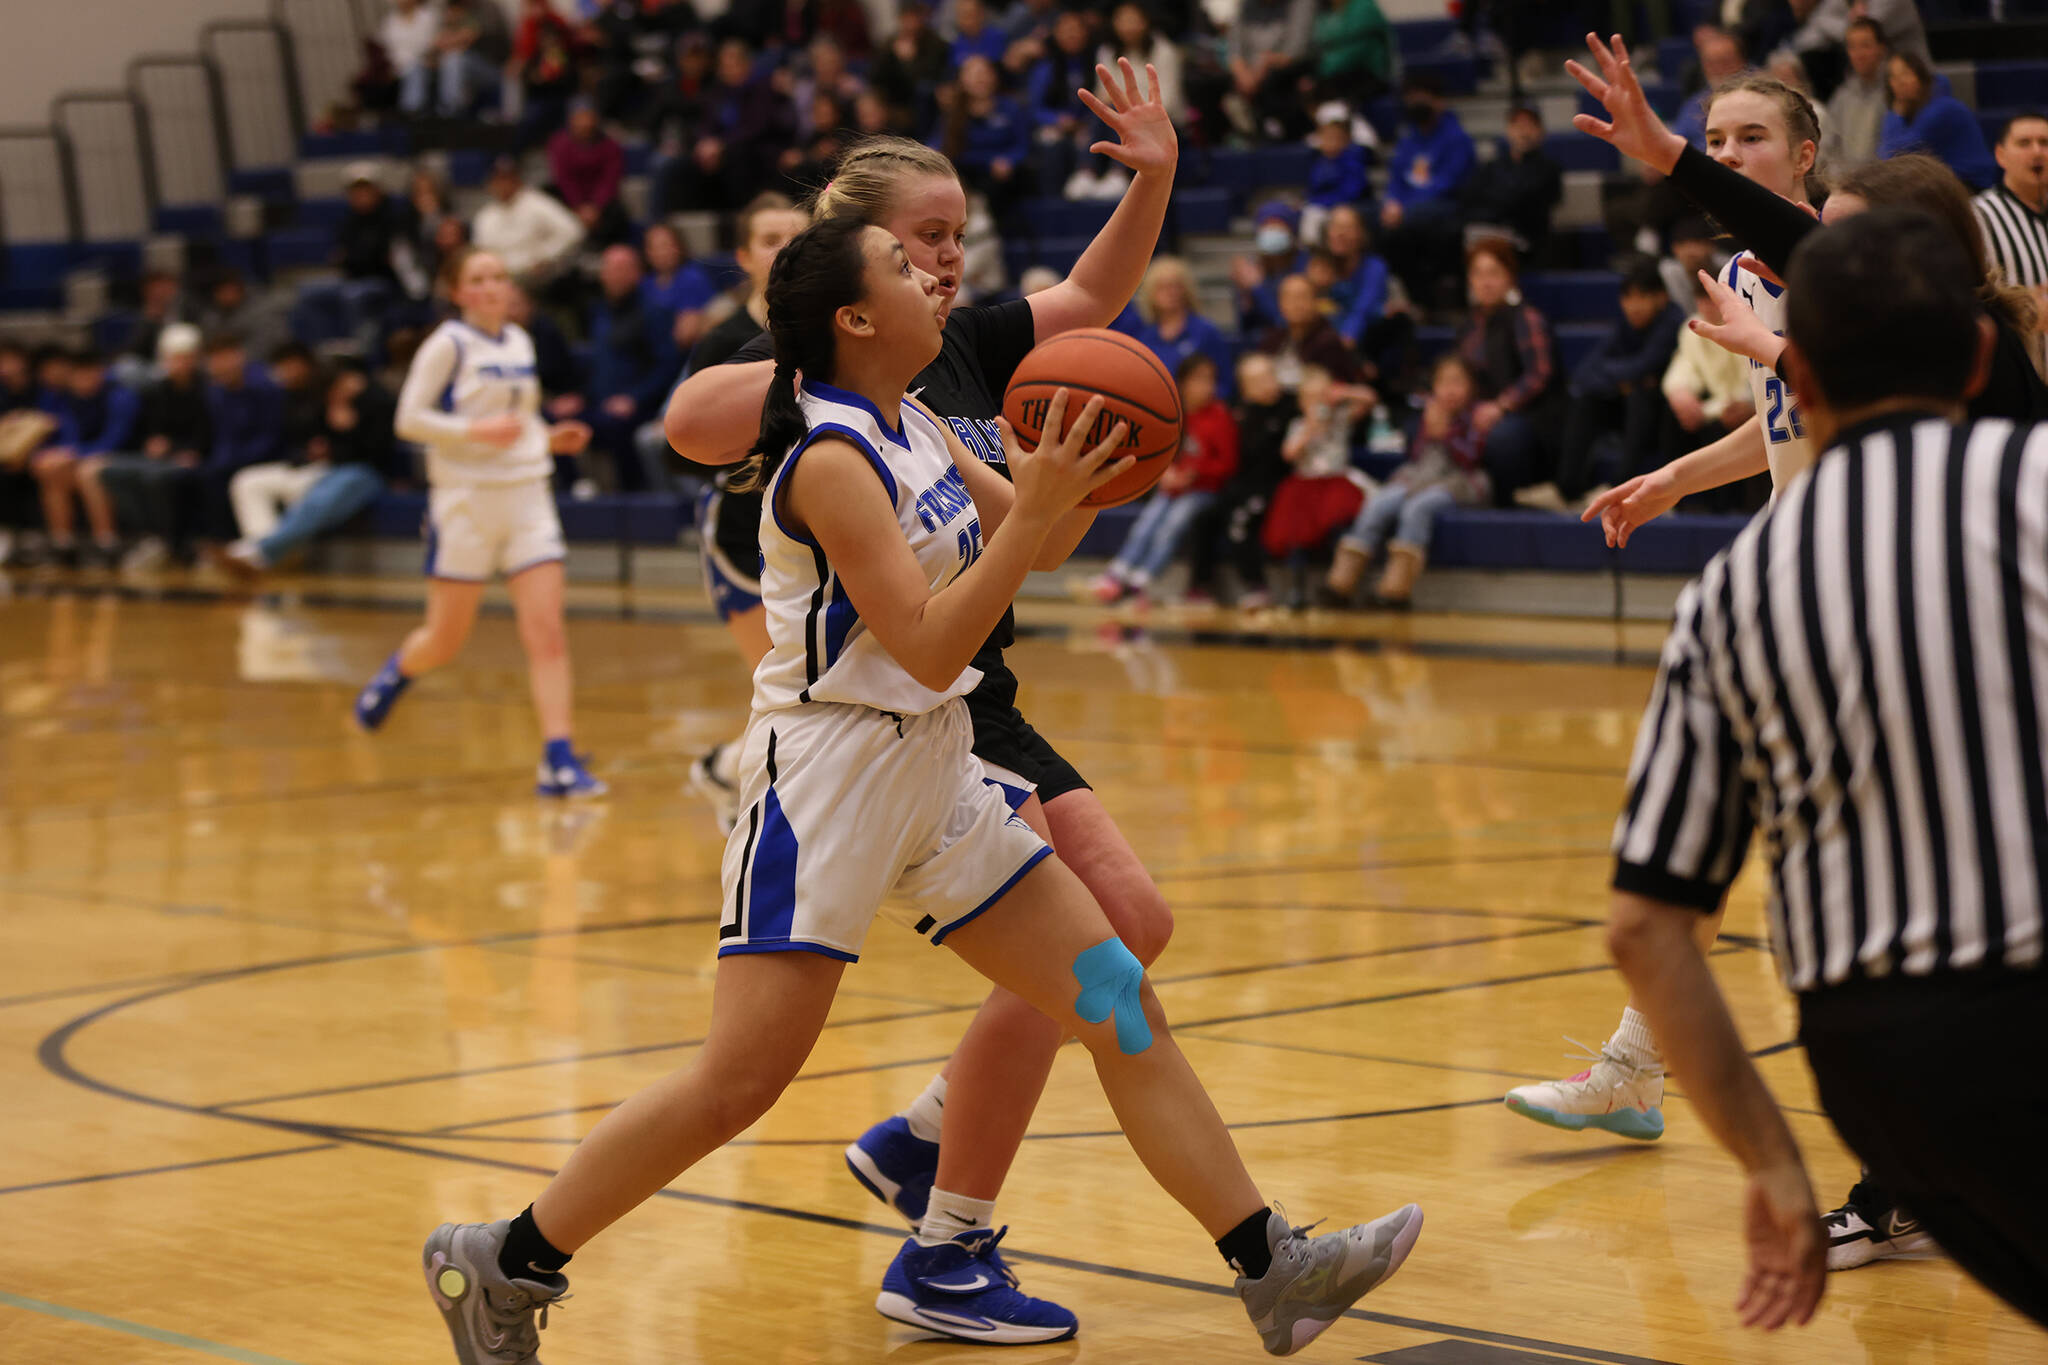 Sophomore Addison Wilson races toward the basket late in TMHS’ comeback win. Wilson was one of four players on her team to score 9 points. (Ben Hohenstatt / Juneau Empire)